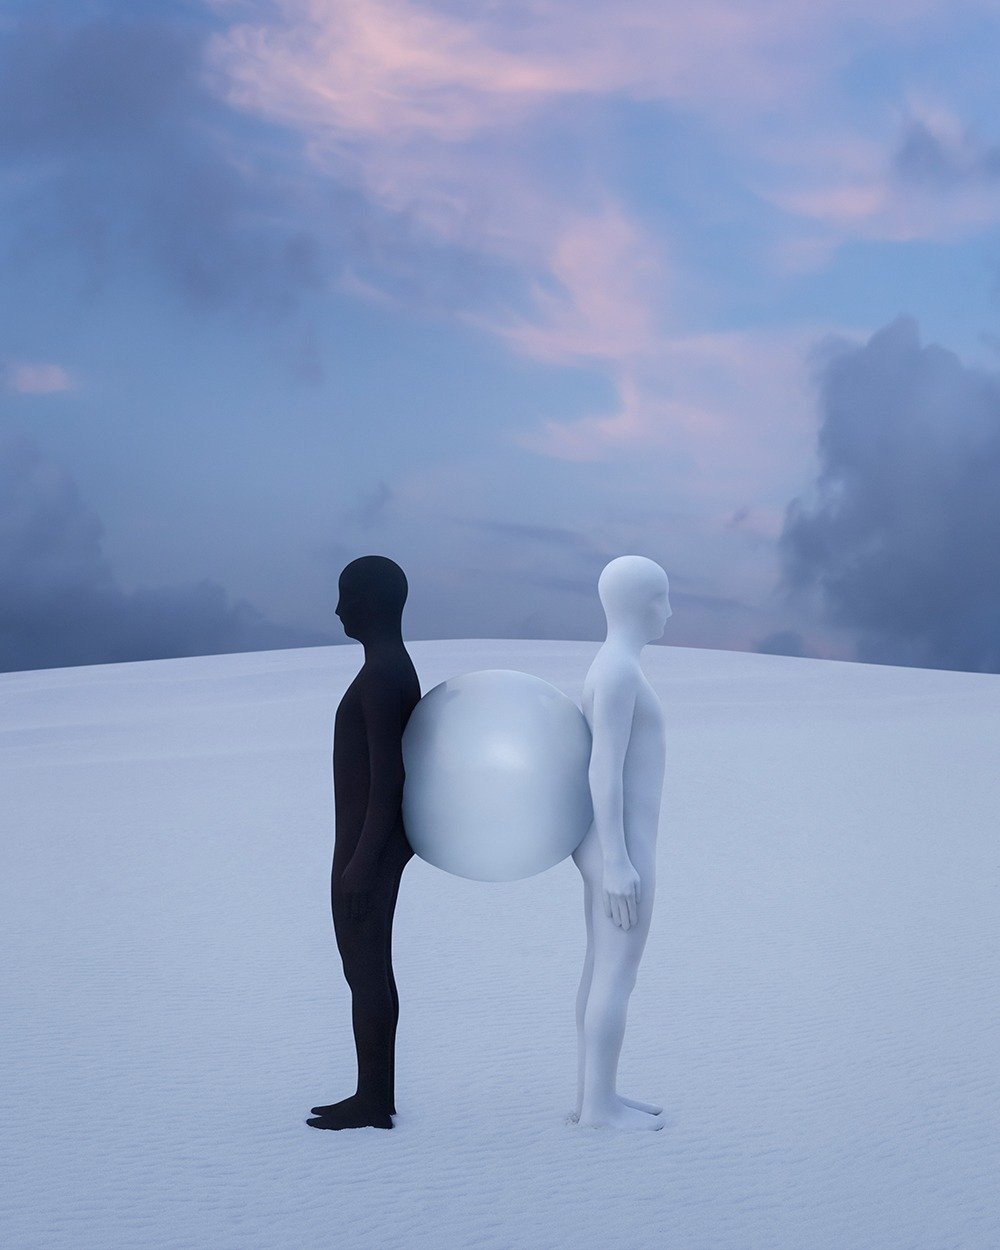 Gabriel Isak photo: Two people and a ball in white desert